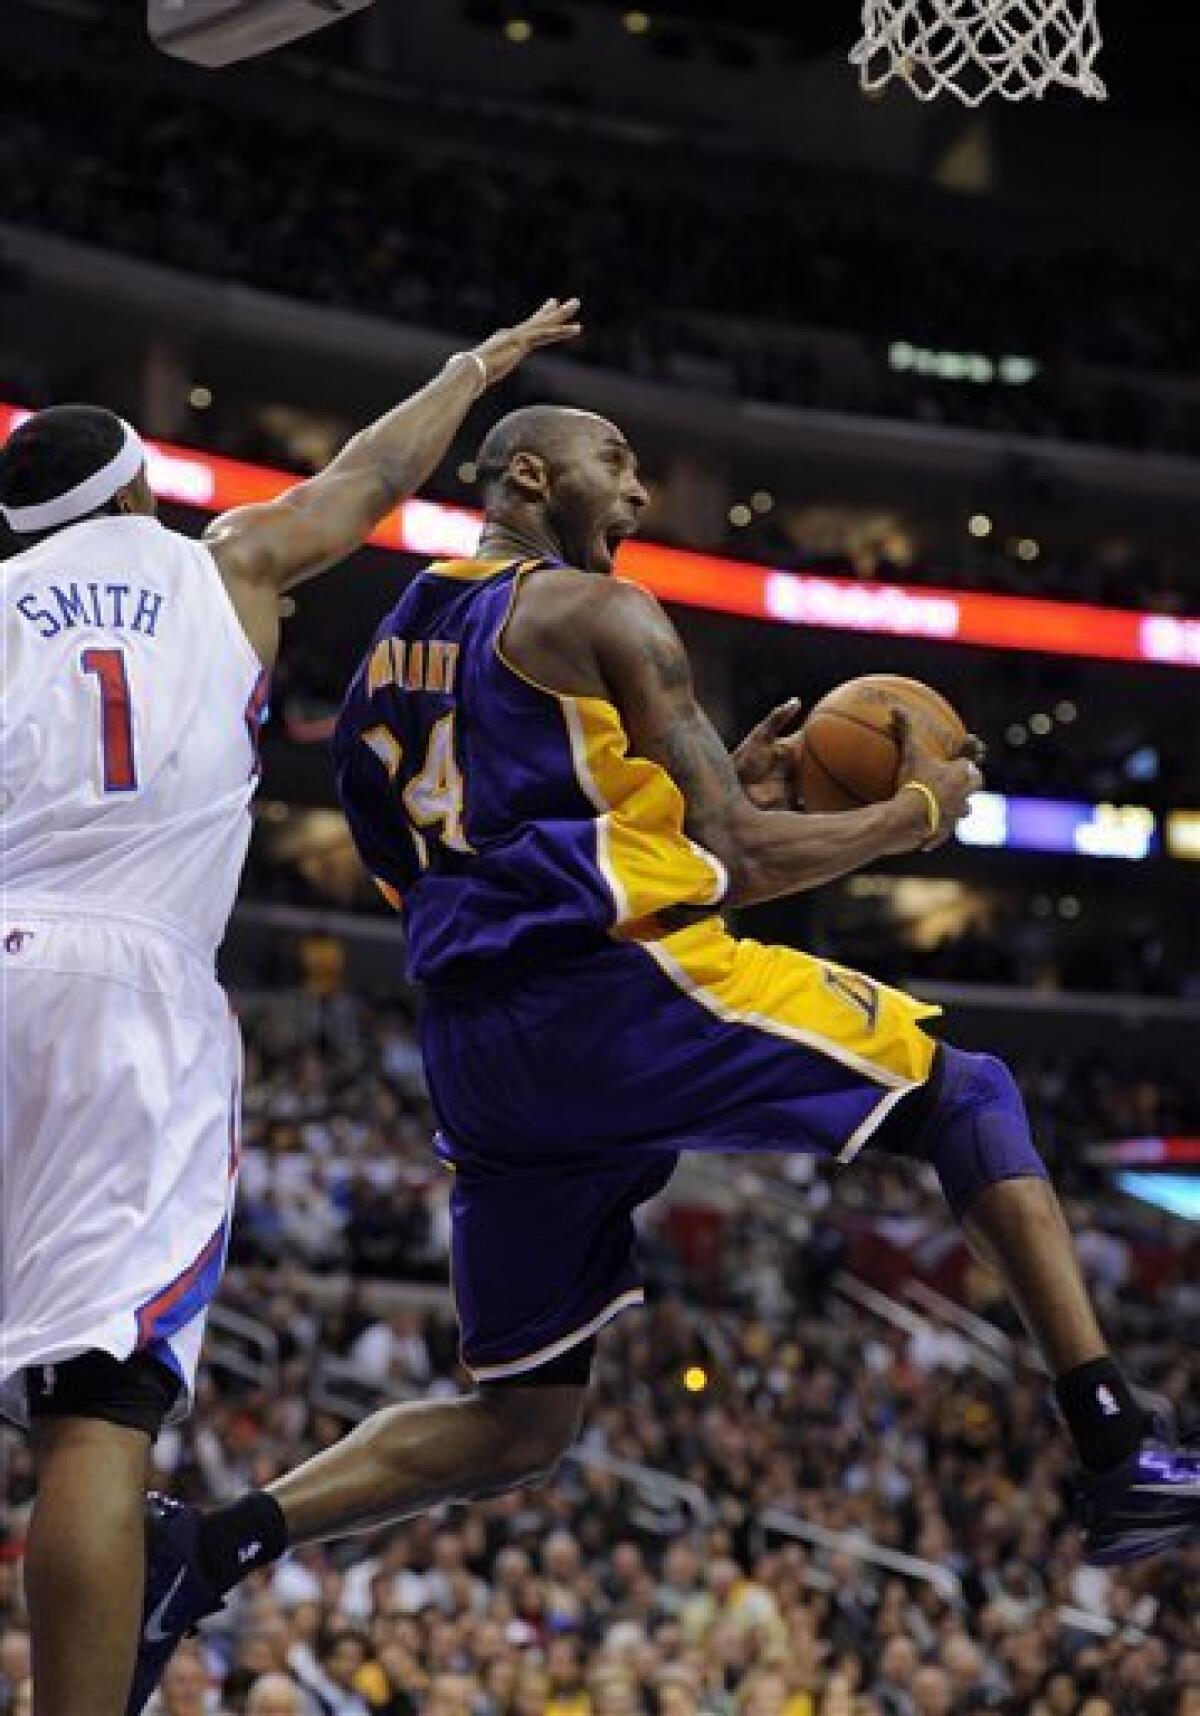 Lakers beat Clippers 87-86 on Fisher's layup - The San Diego Union 